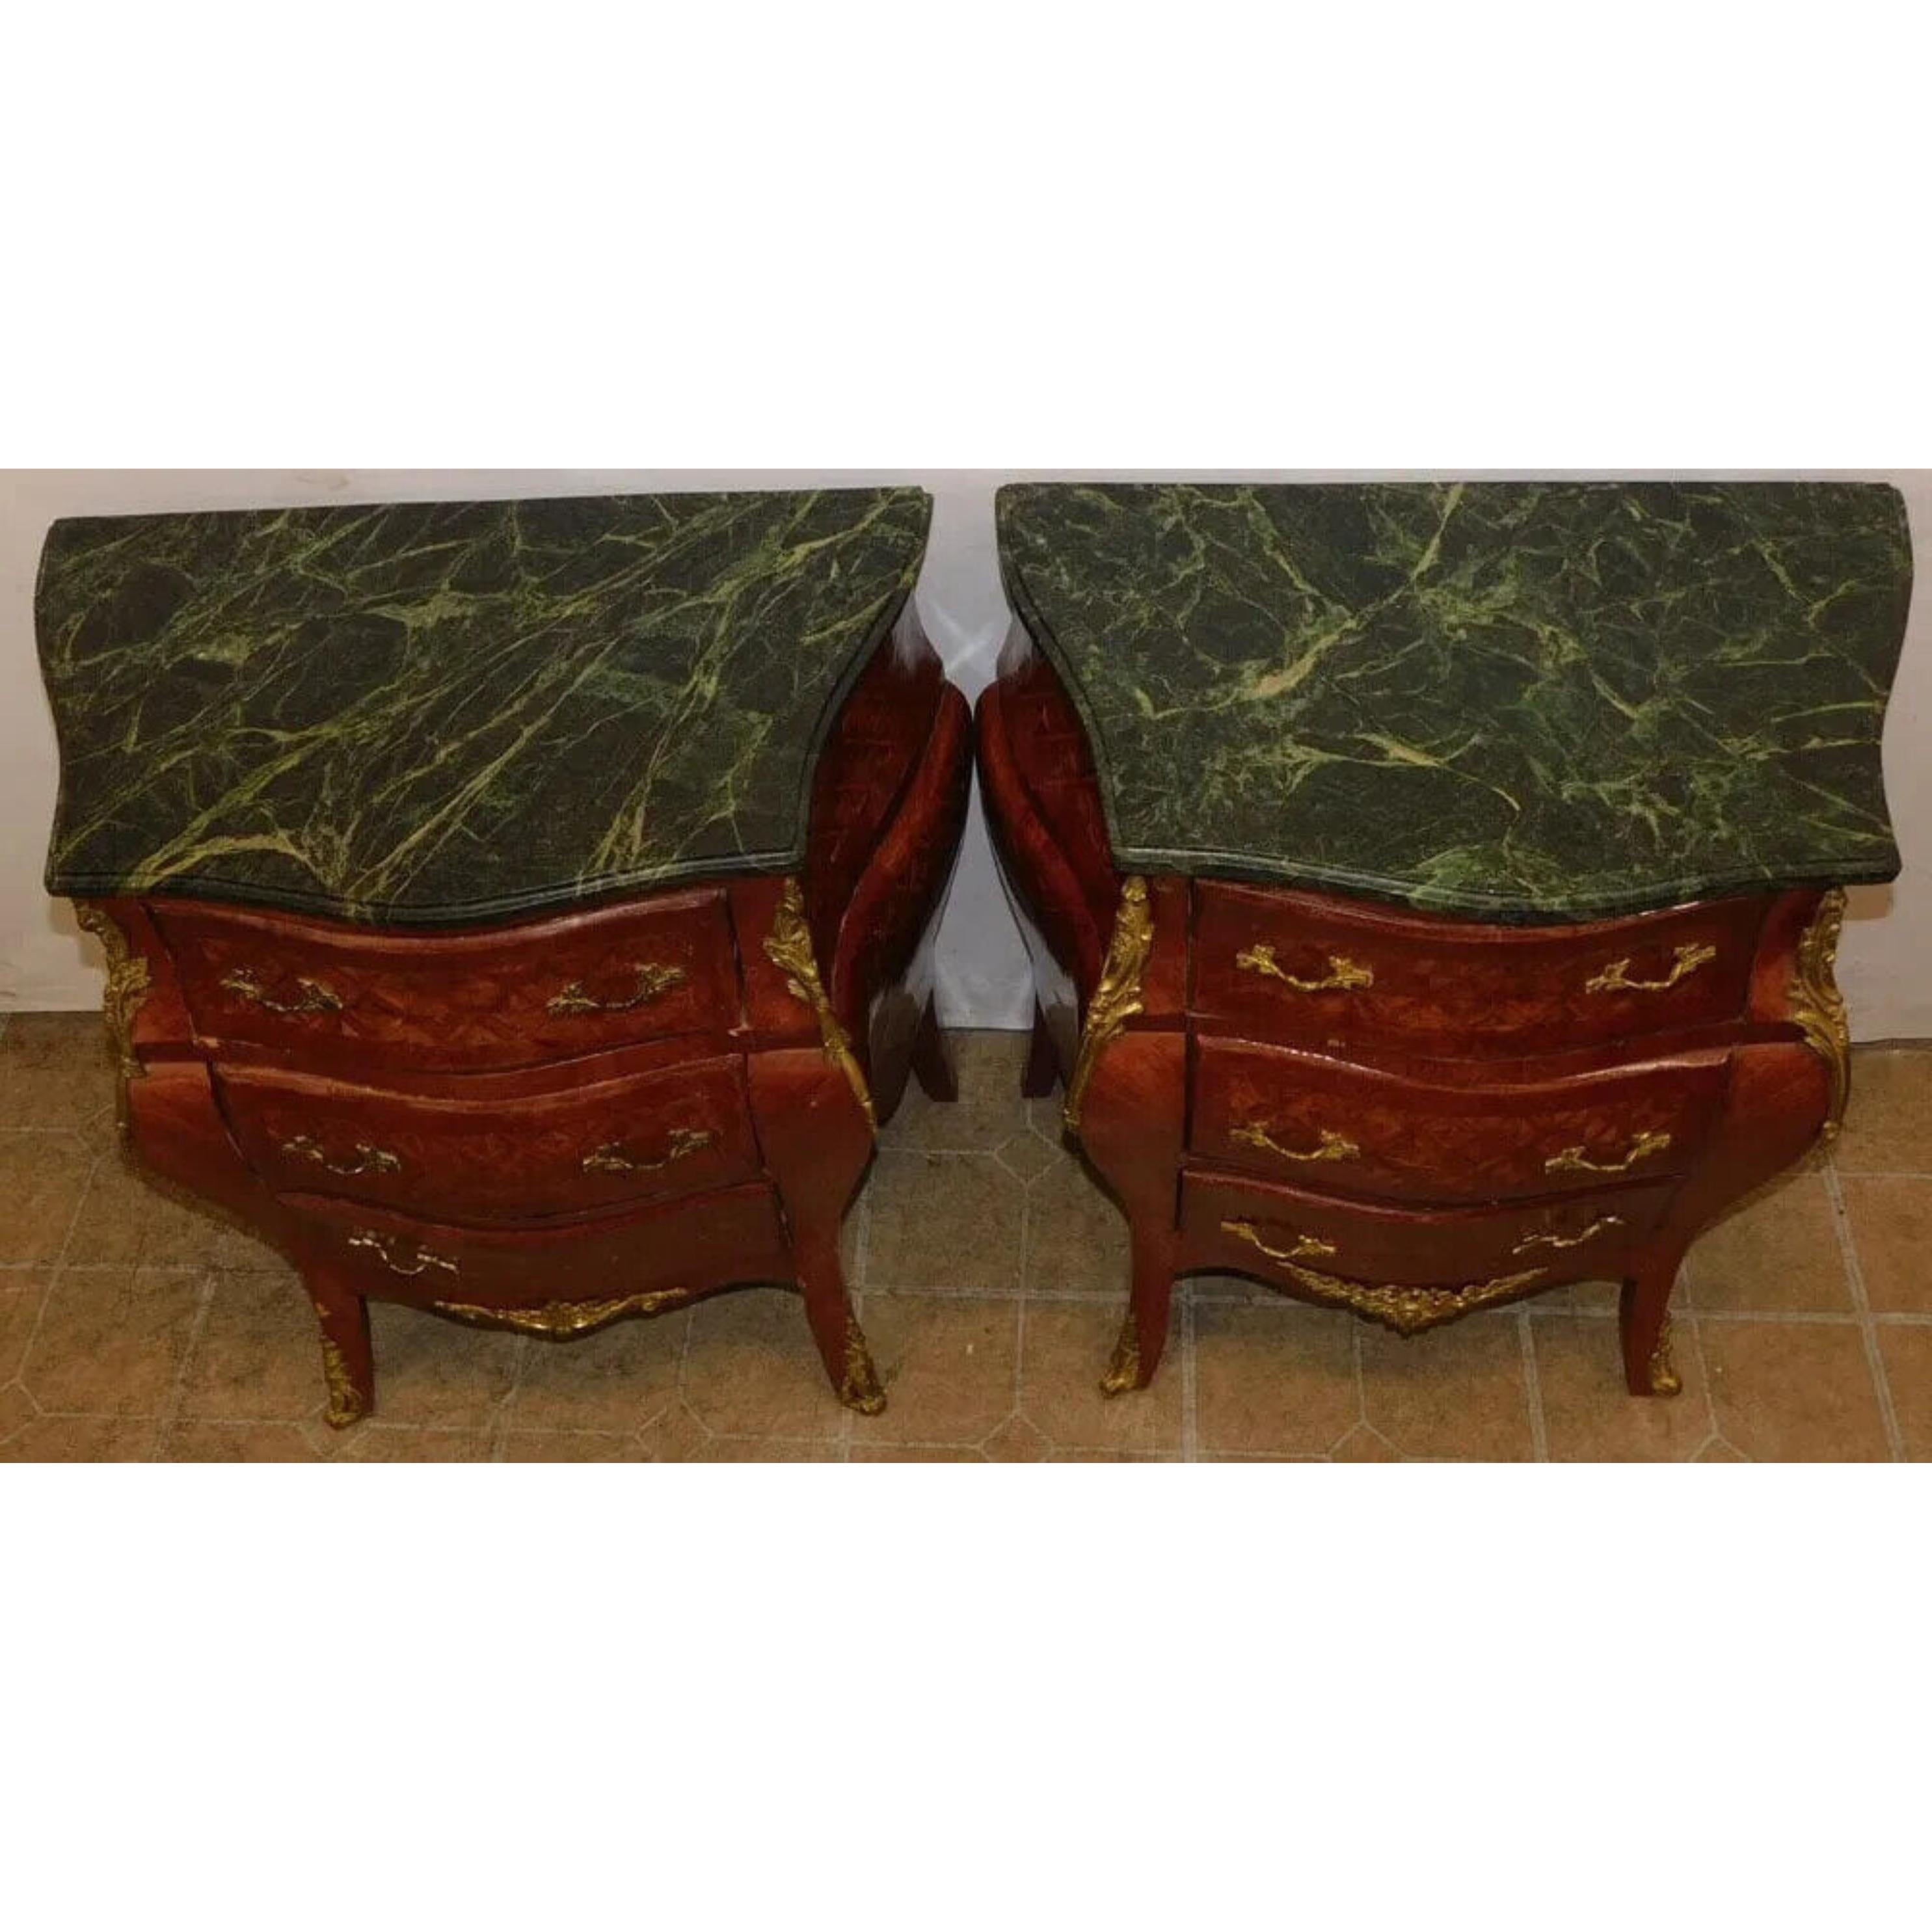 20th Century 20th C. Walnut Inlay, Marble Top, Diminutive, With Bronze Commodes, Set of Two!